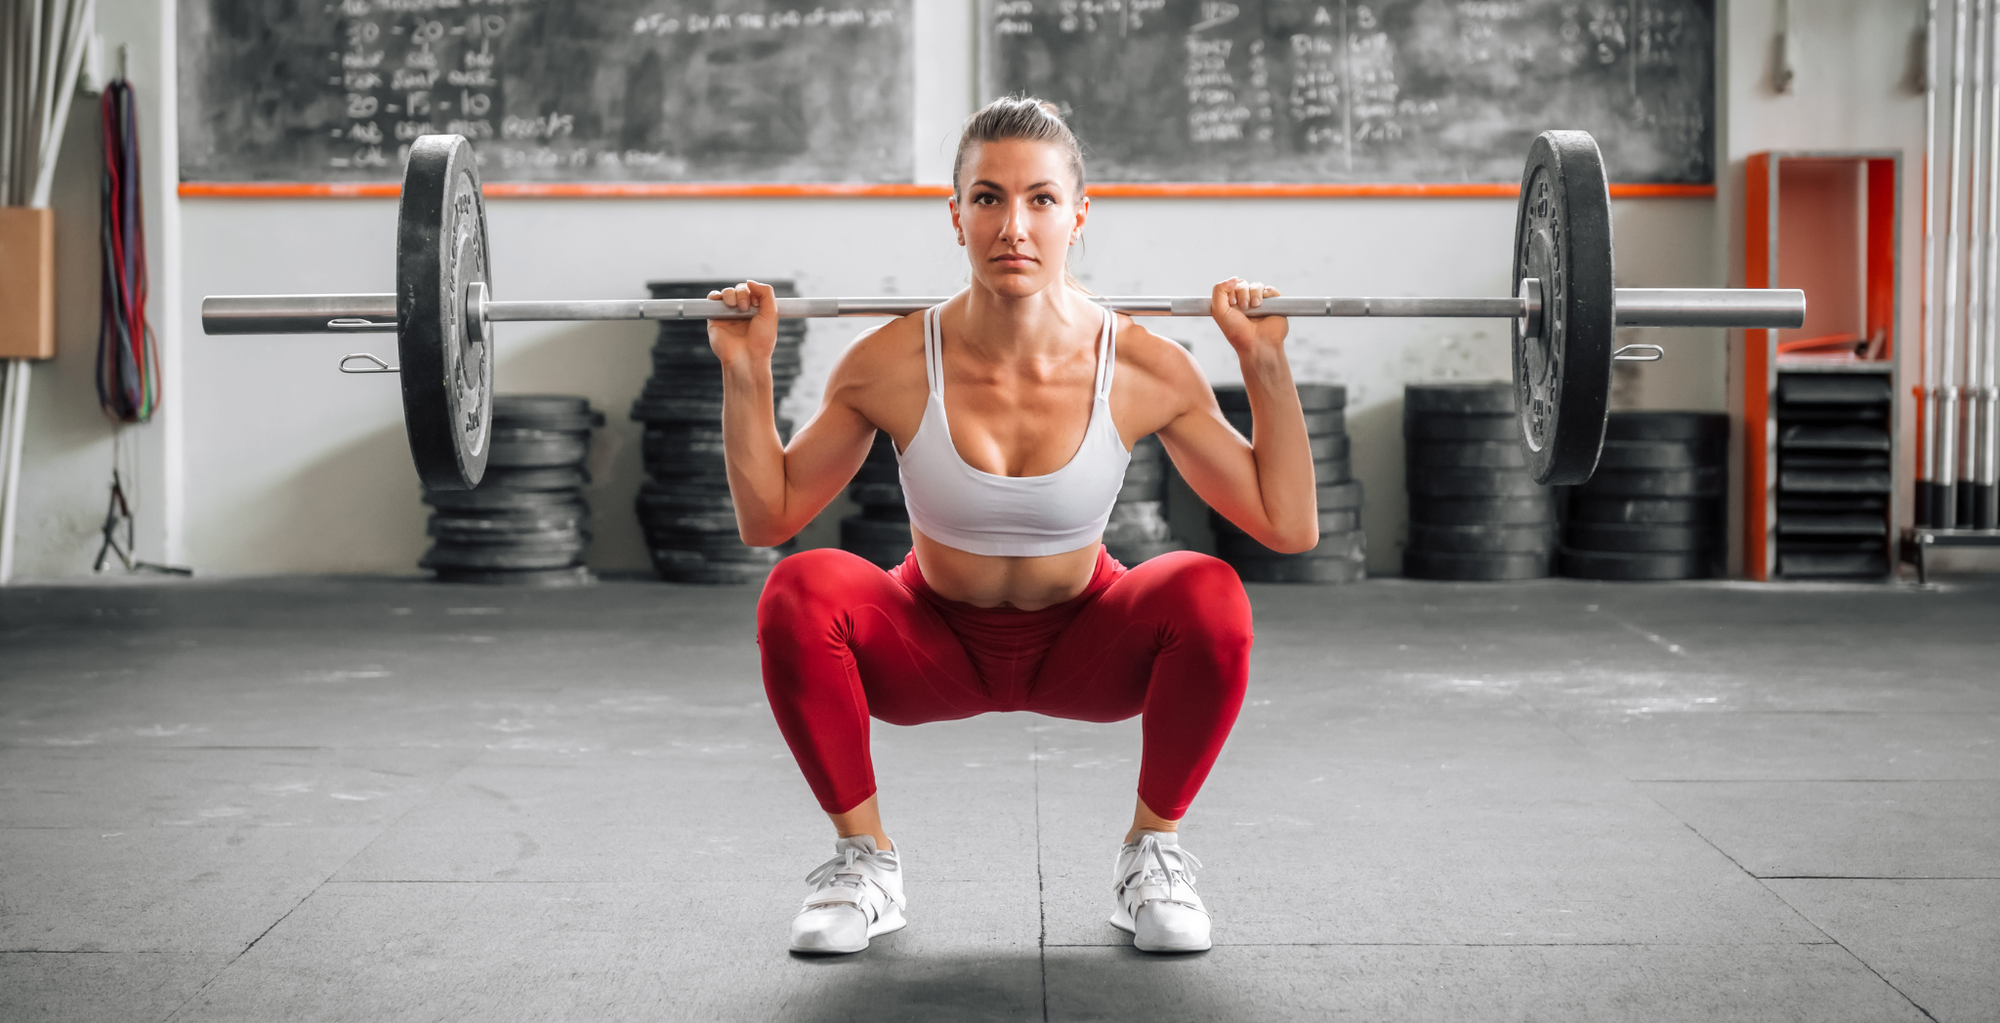 Answer To How To Build Strong Legs: 10 Yoga Poses To Try , Exercise to Make Legs Strong, Build Strong Legs, Yoga Poses Build Legs, Yoga for Legs, Legs up the Wall Before Bed, Yoga Leg Stretches, Build Strong Legs in Yoga